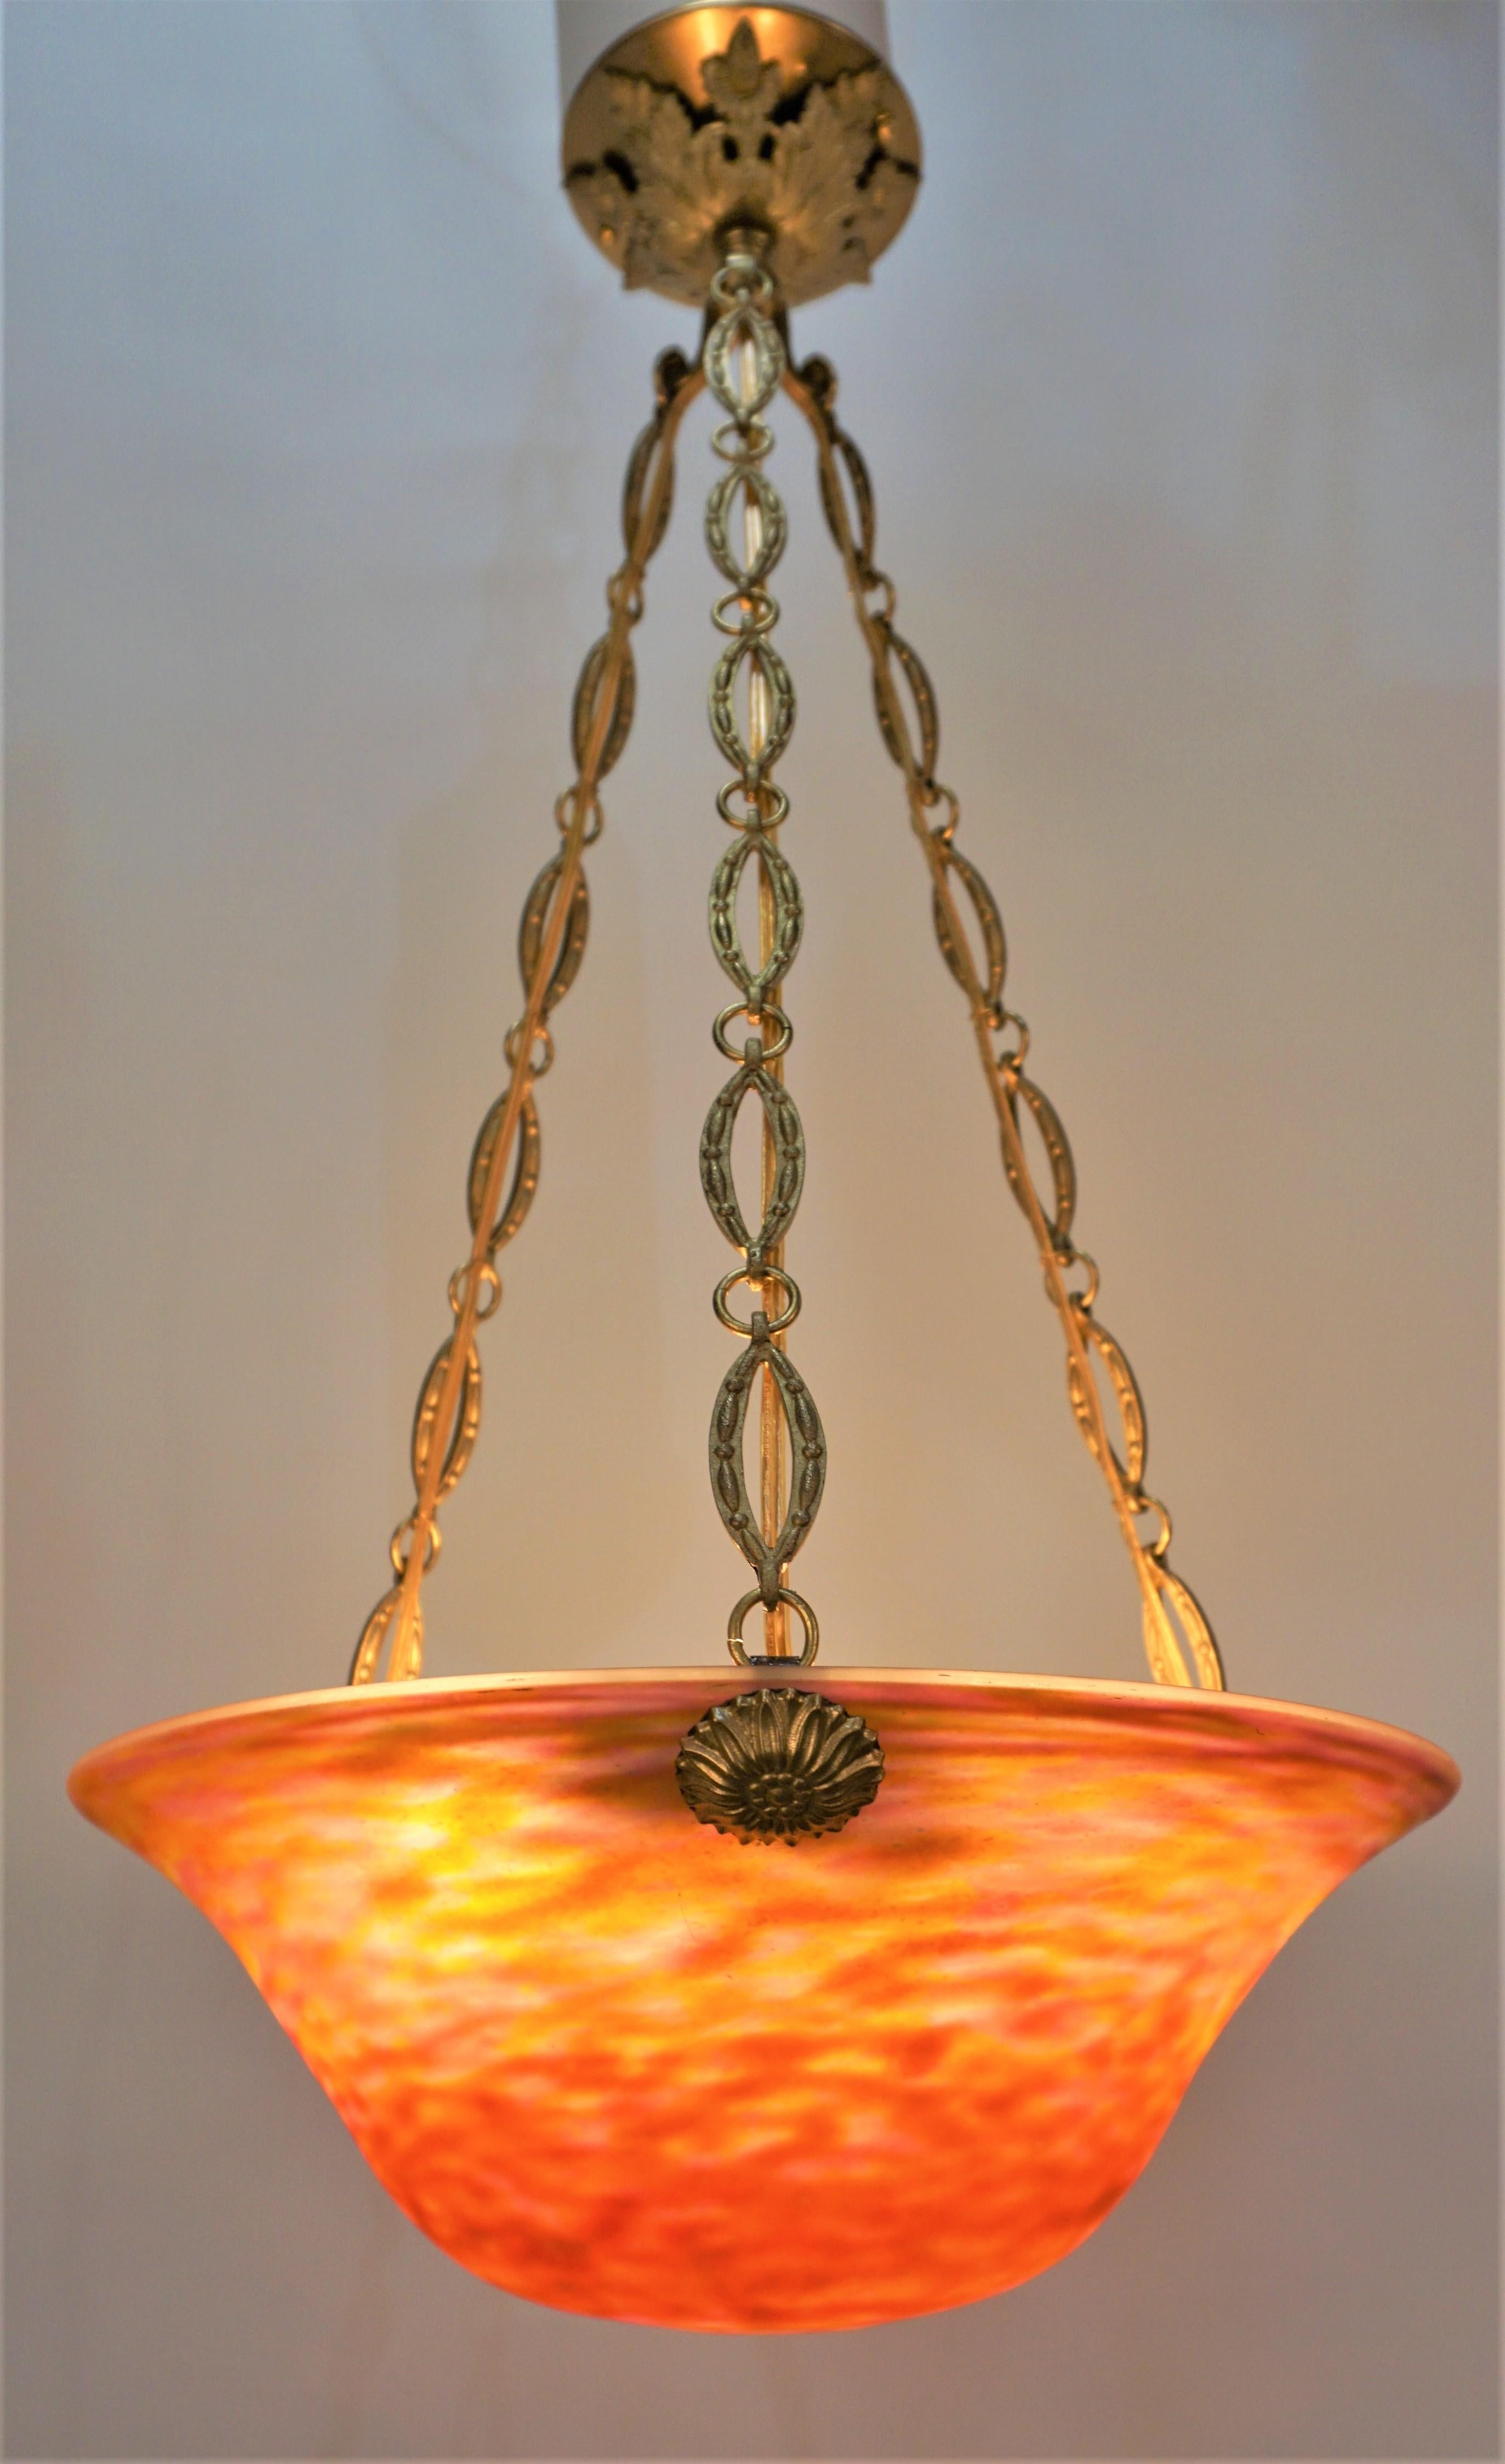 French blown glass pendant chandelier by Daum Nancy, with elegant bronze chain and canopy.
Professionally rewired and ready for installation.
Six lights 60watts each.
